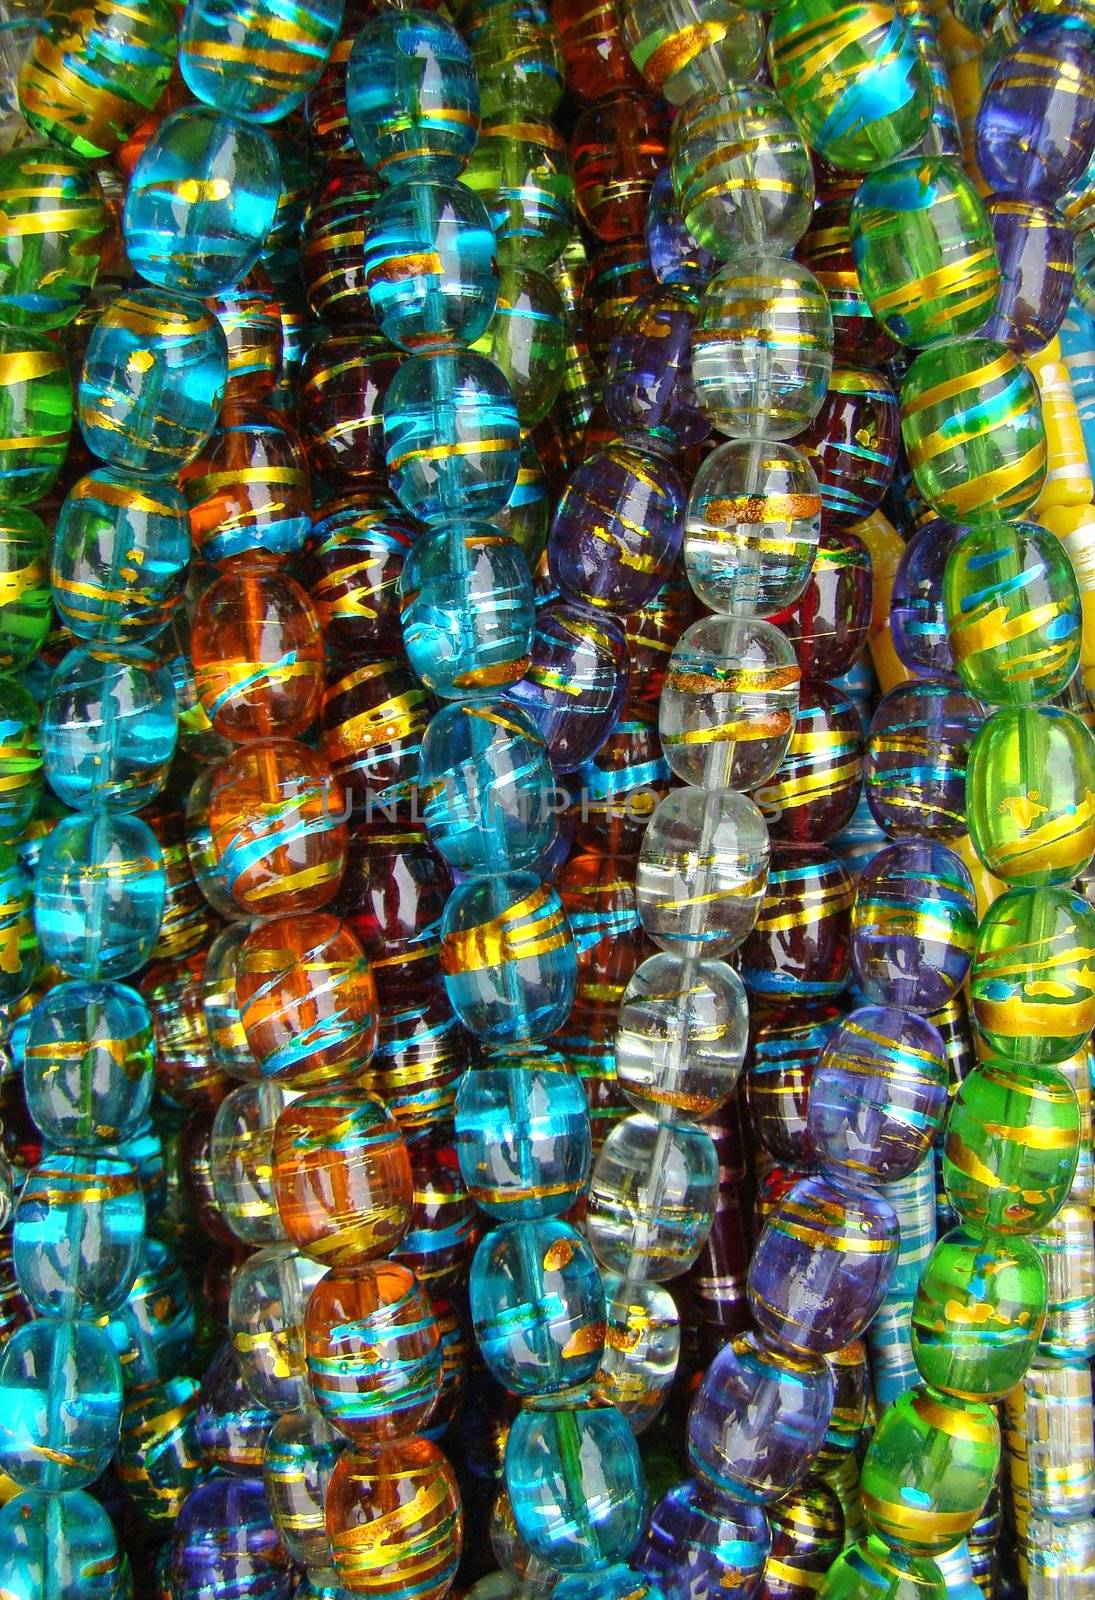           colorful glass necklaces collection                               